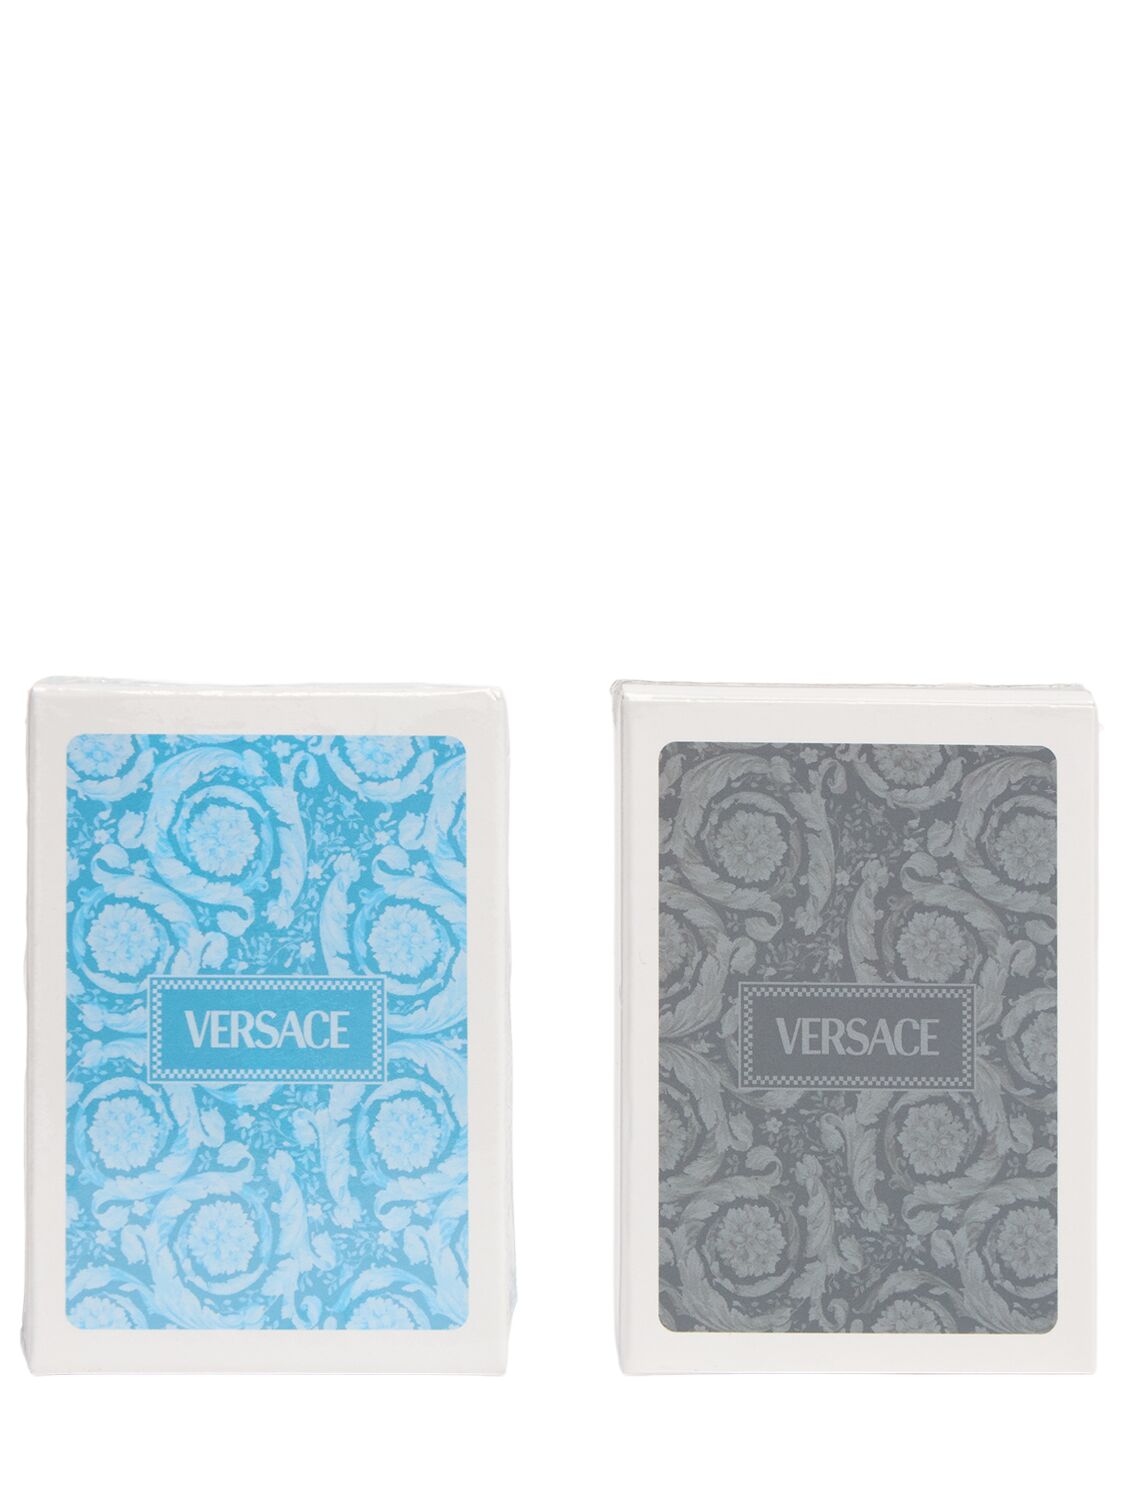 Versace 2 Decks Of Barocco Playing Cards In Multi